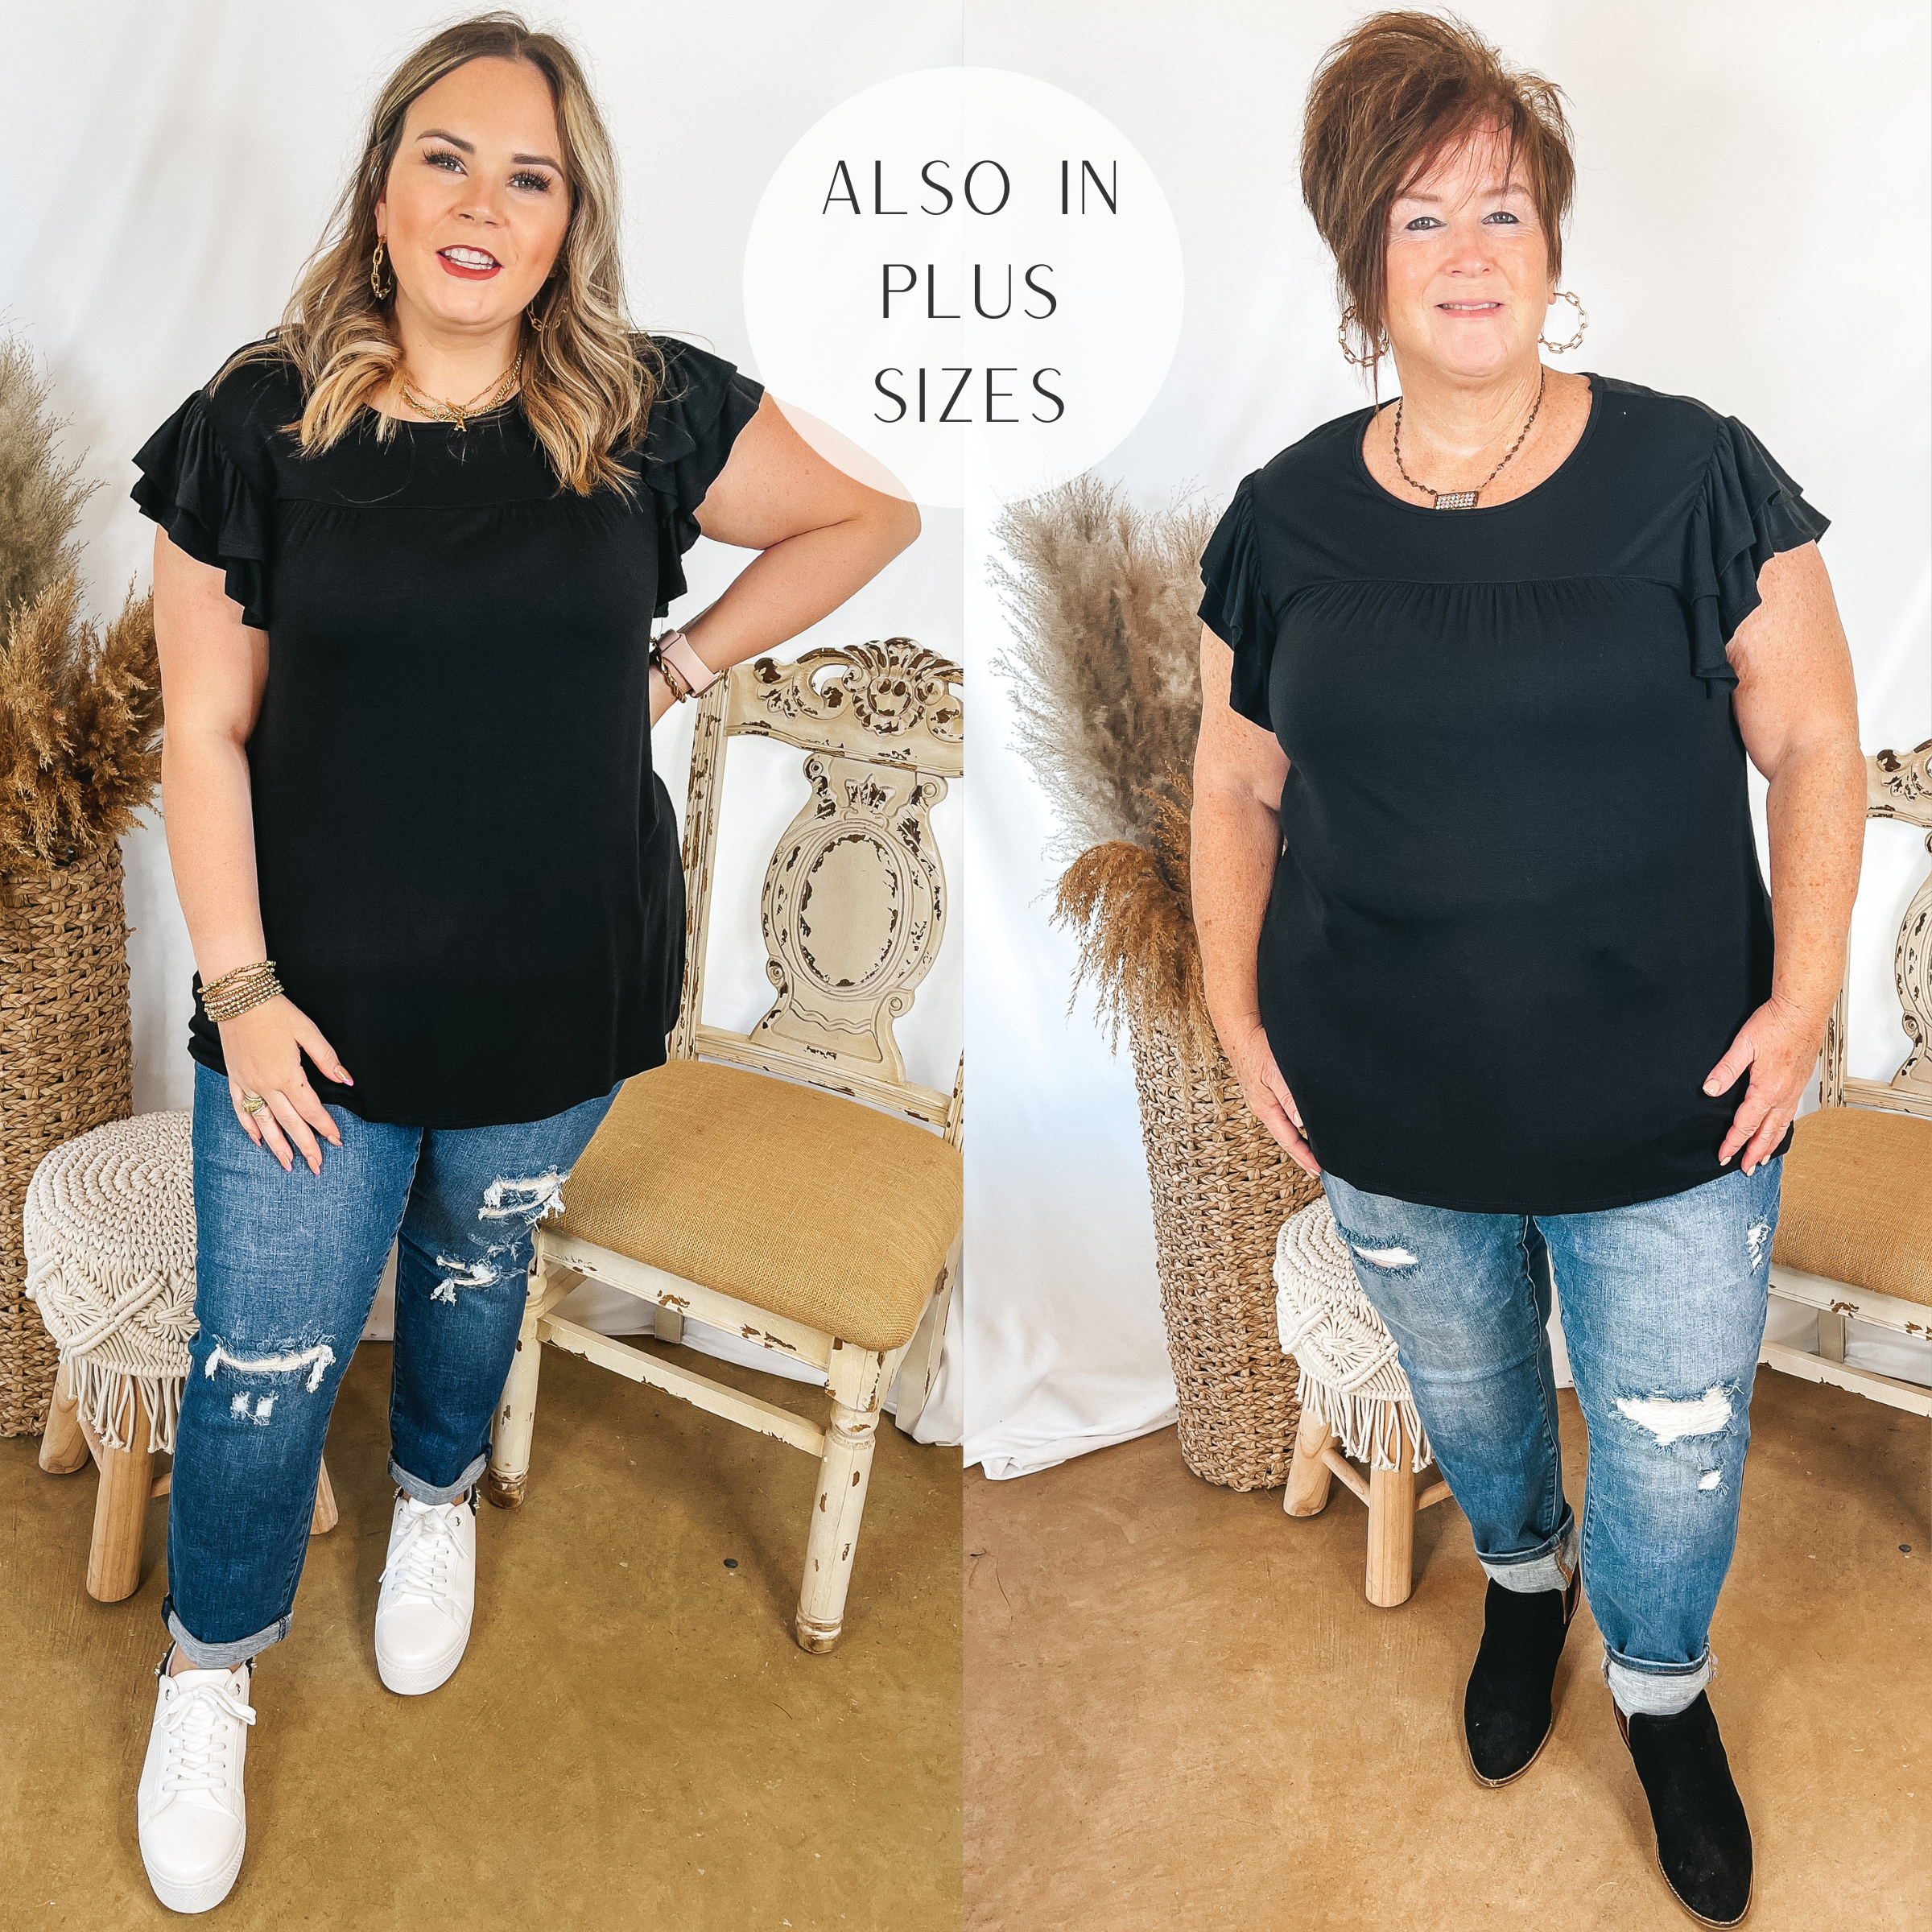 Models are wearing a ruffle sleeve babydoll top in black. Size large model has this top paired with dark wash boyfriend jeans, white sneakers, and gold jewelry. Plus size model has it paired with light wash boyfriend jeans, black booties, and Pink Panache jewelry.